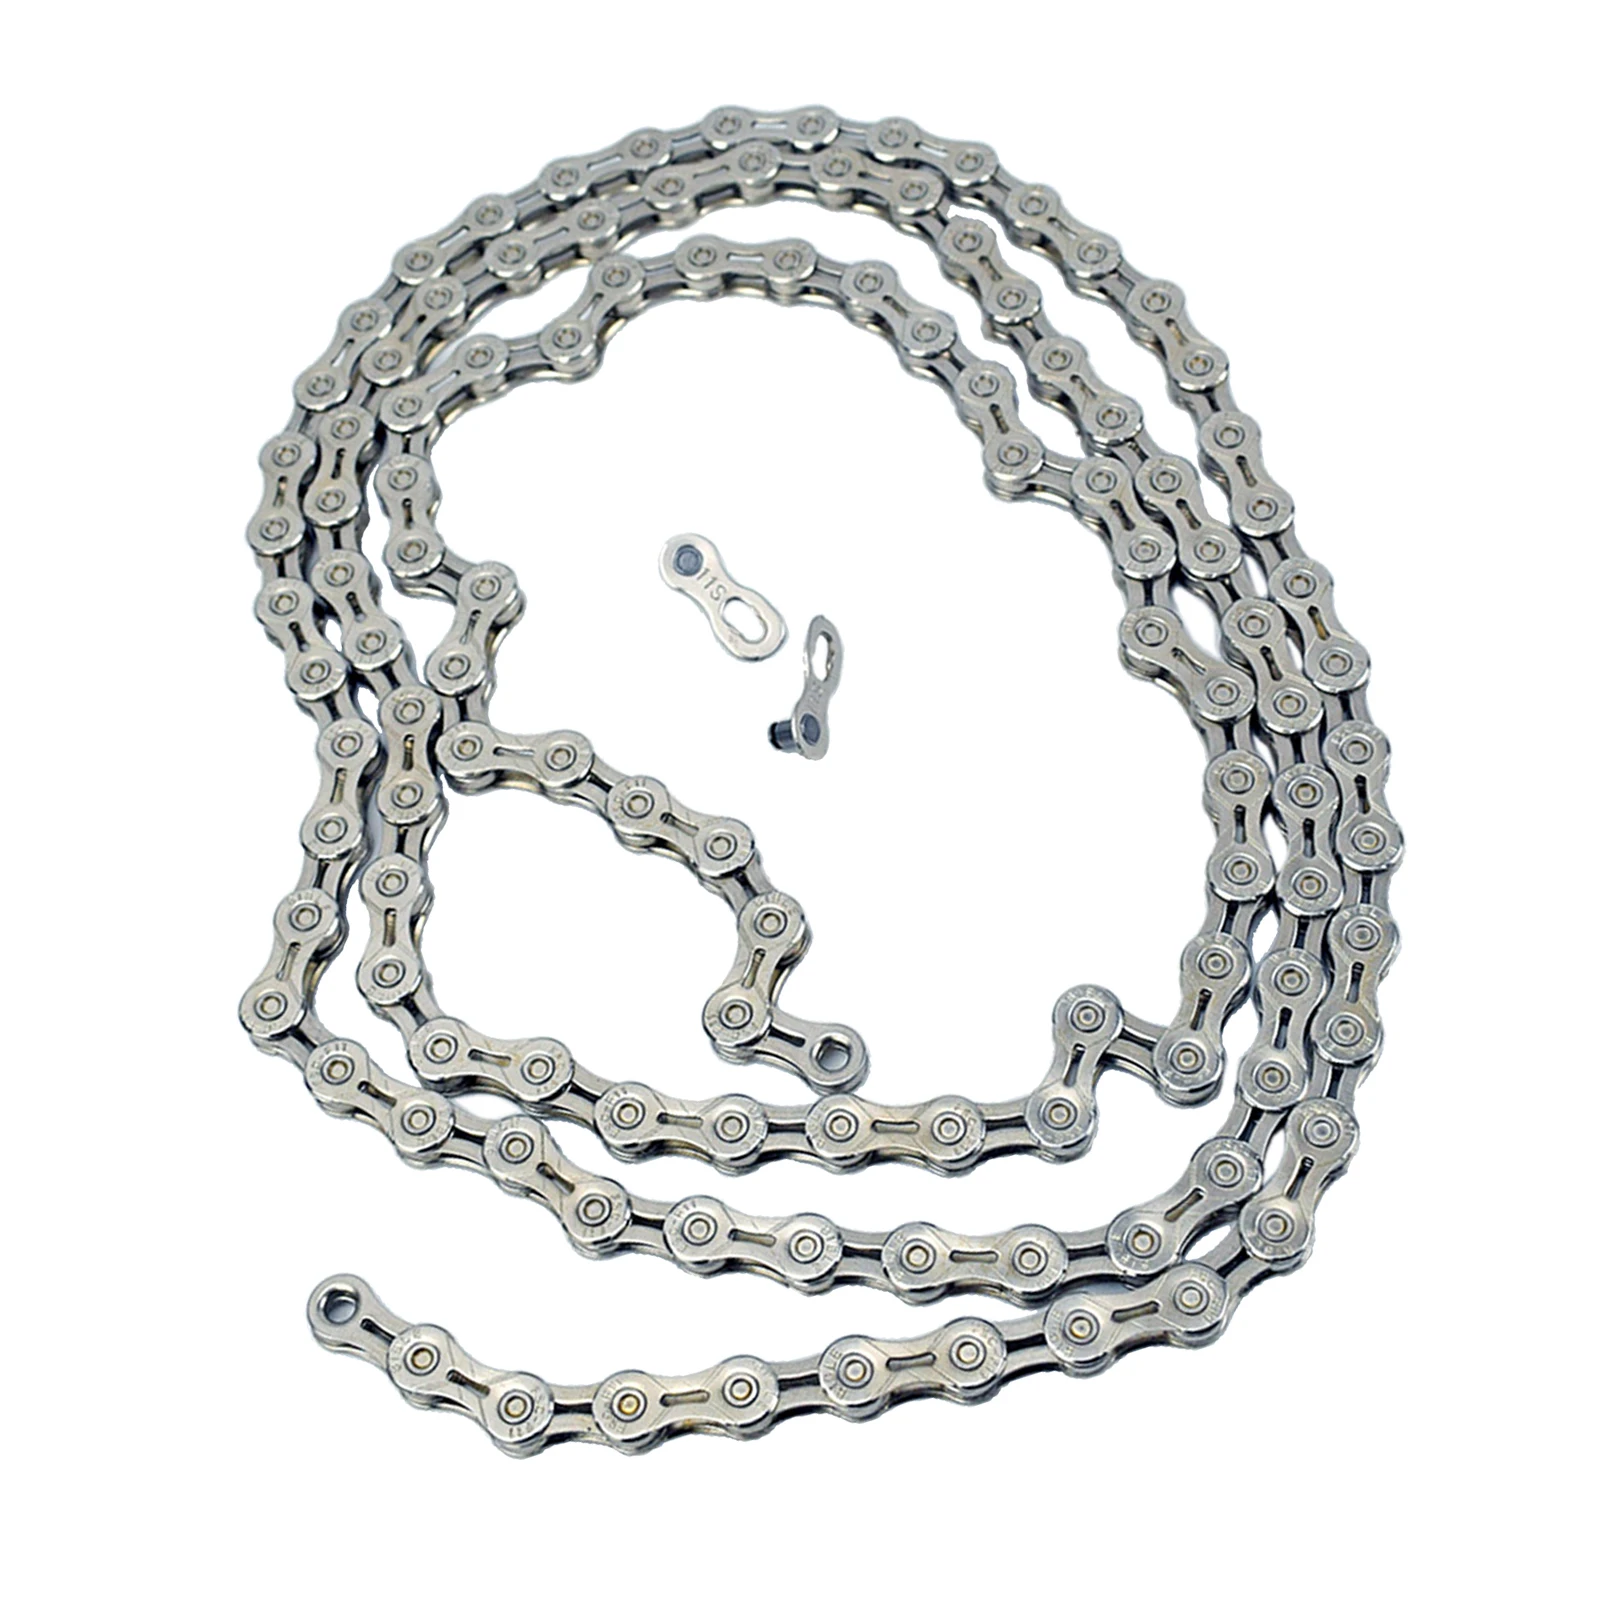 Bike Chain Universal Mountain Bicycle Chains Link For Sarm Repair Component